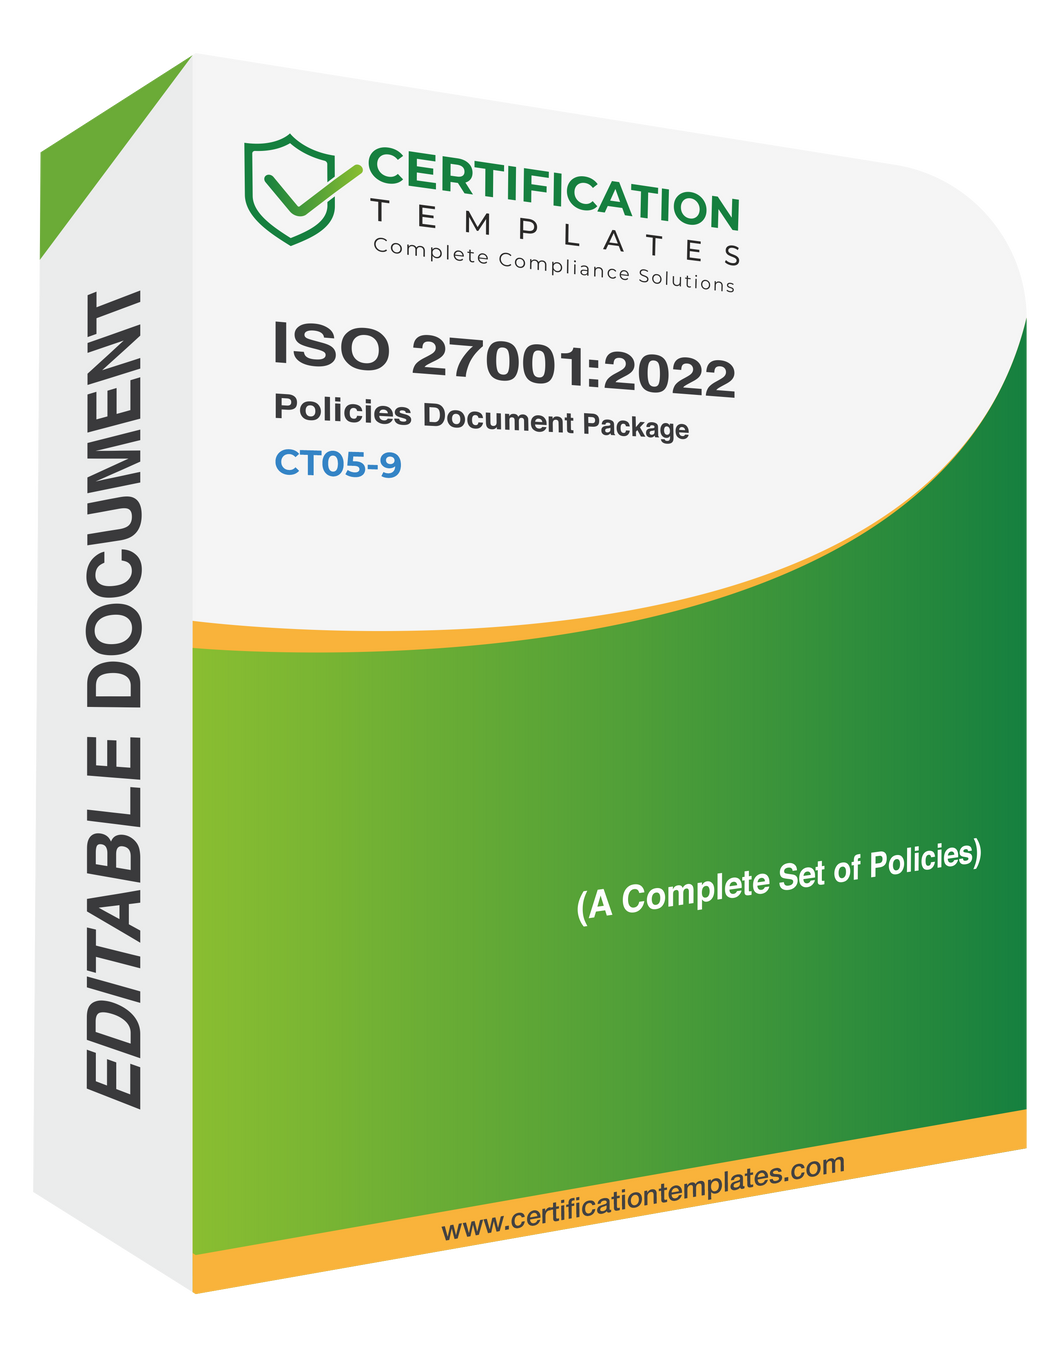 ISO 27001 Policies Document